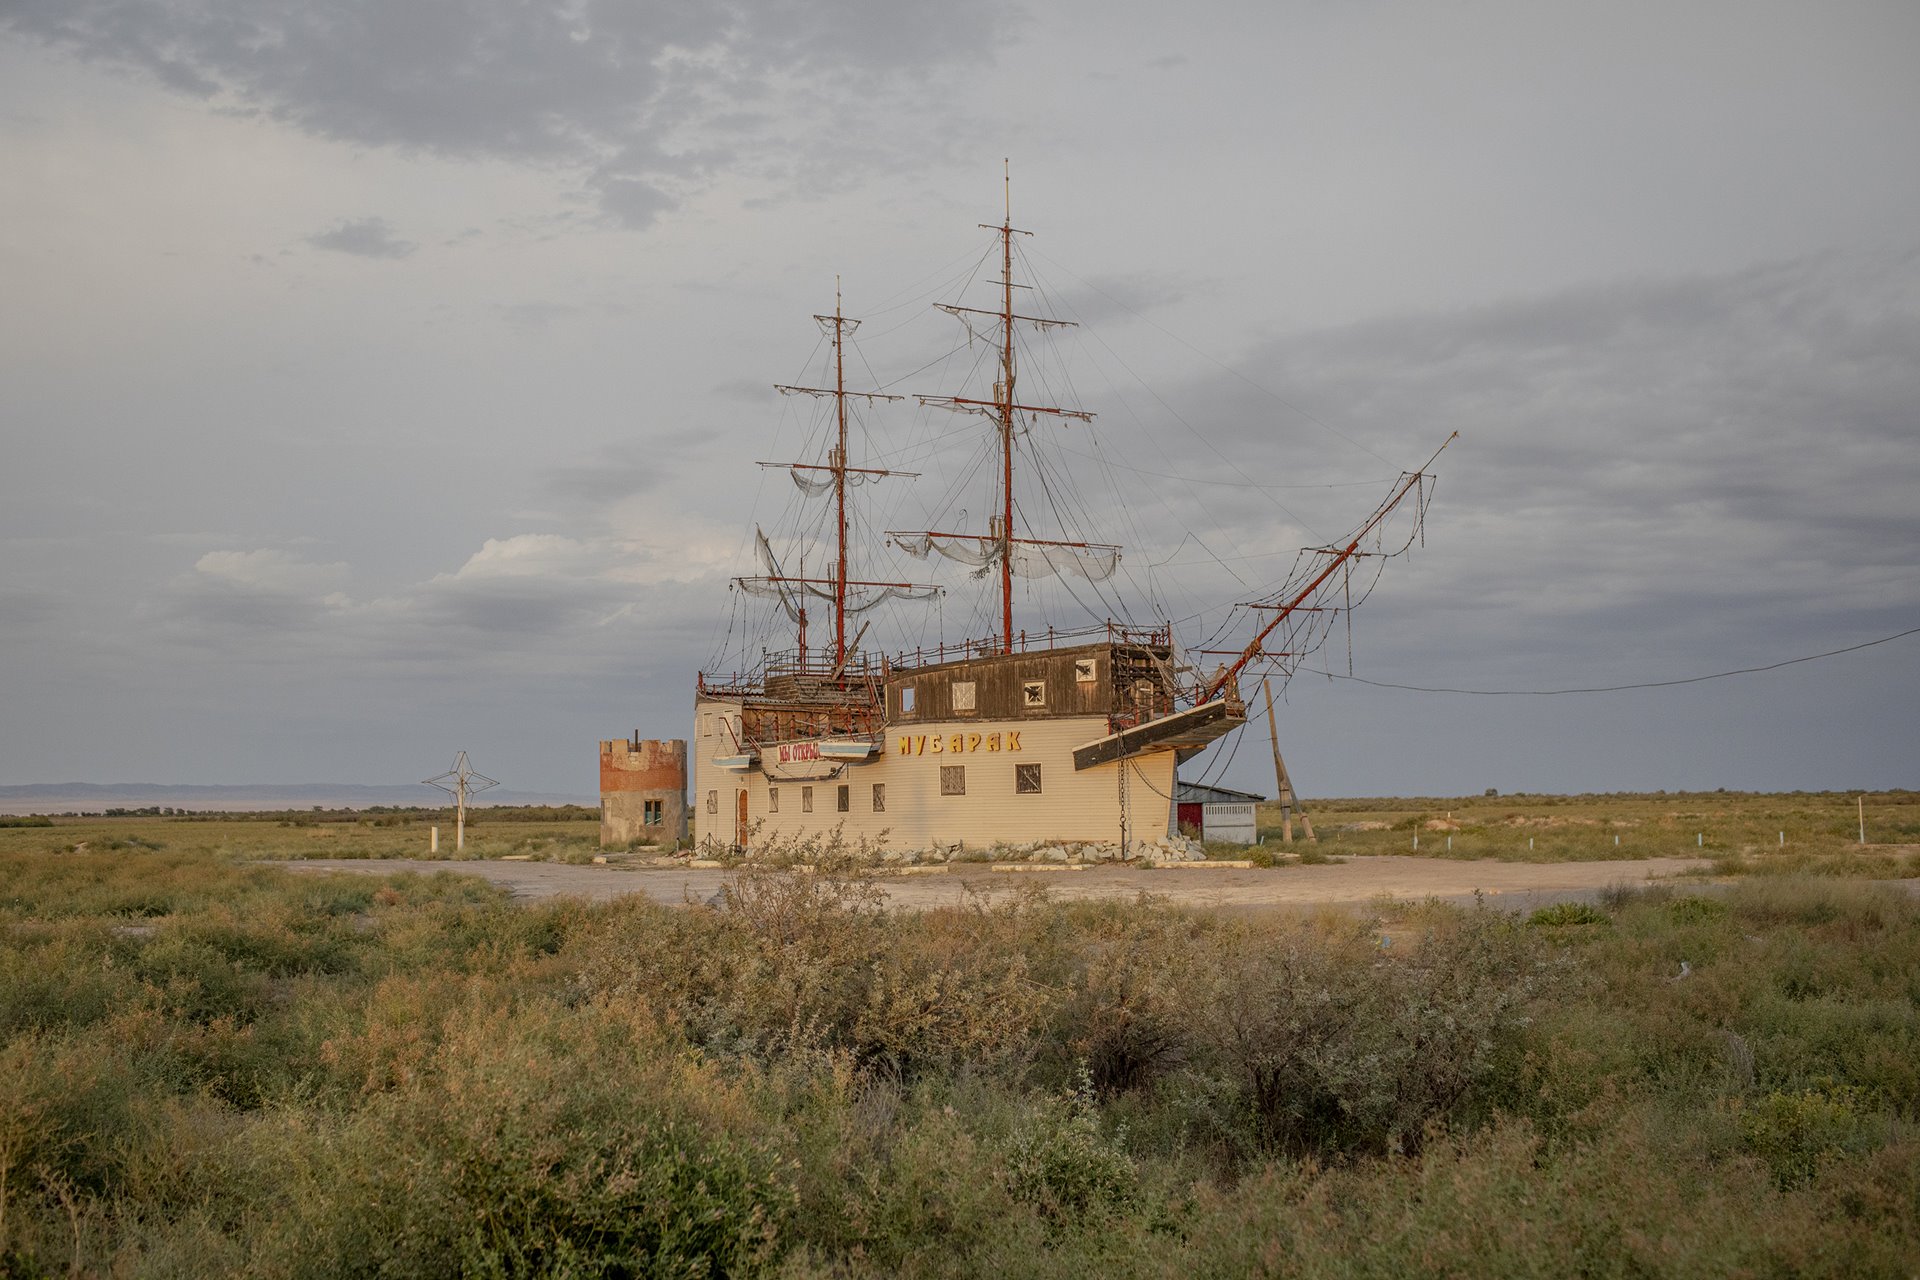 A former restaurant, which locals call the <em>Titanic</em>, stands abandoned on a steppe near Lake Balkhash, in Kazakhstan. Like the Aral Sea, the lake &ndash; &nbsp;one of the largest in Asia &ndash; is shrinking due to the diversion of water from rivers that feed it for agriculture and industry.&nbsp;